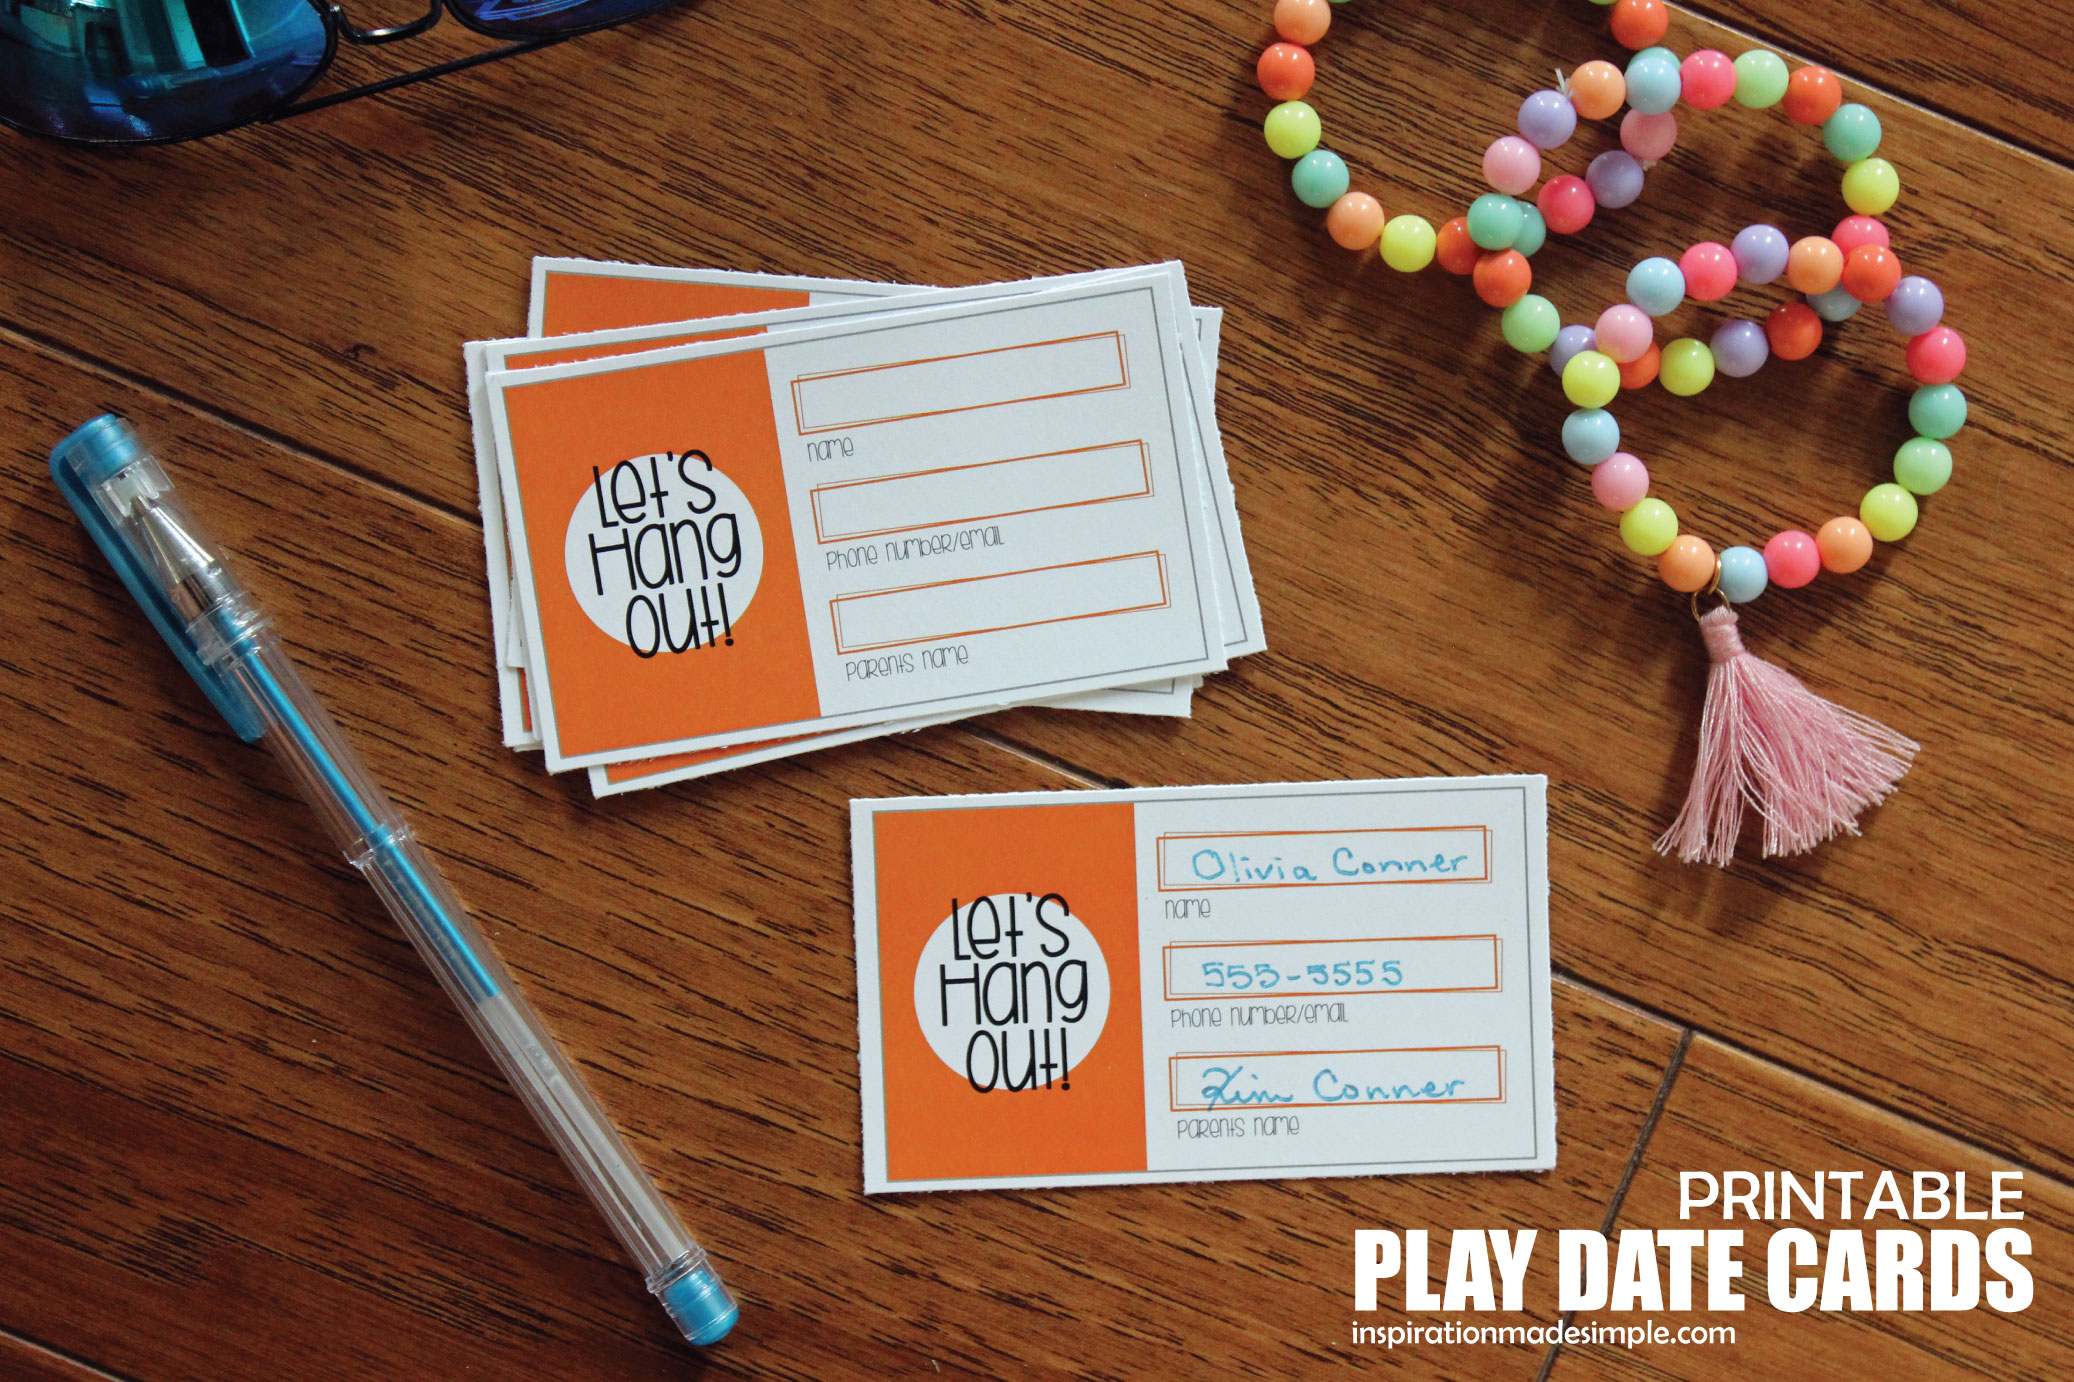 Printable play date cards keeps your kids social lives hopping!